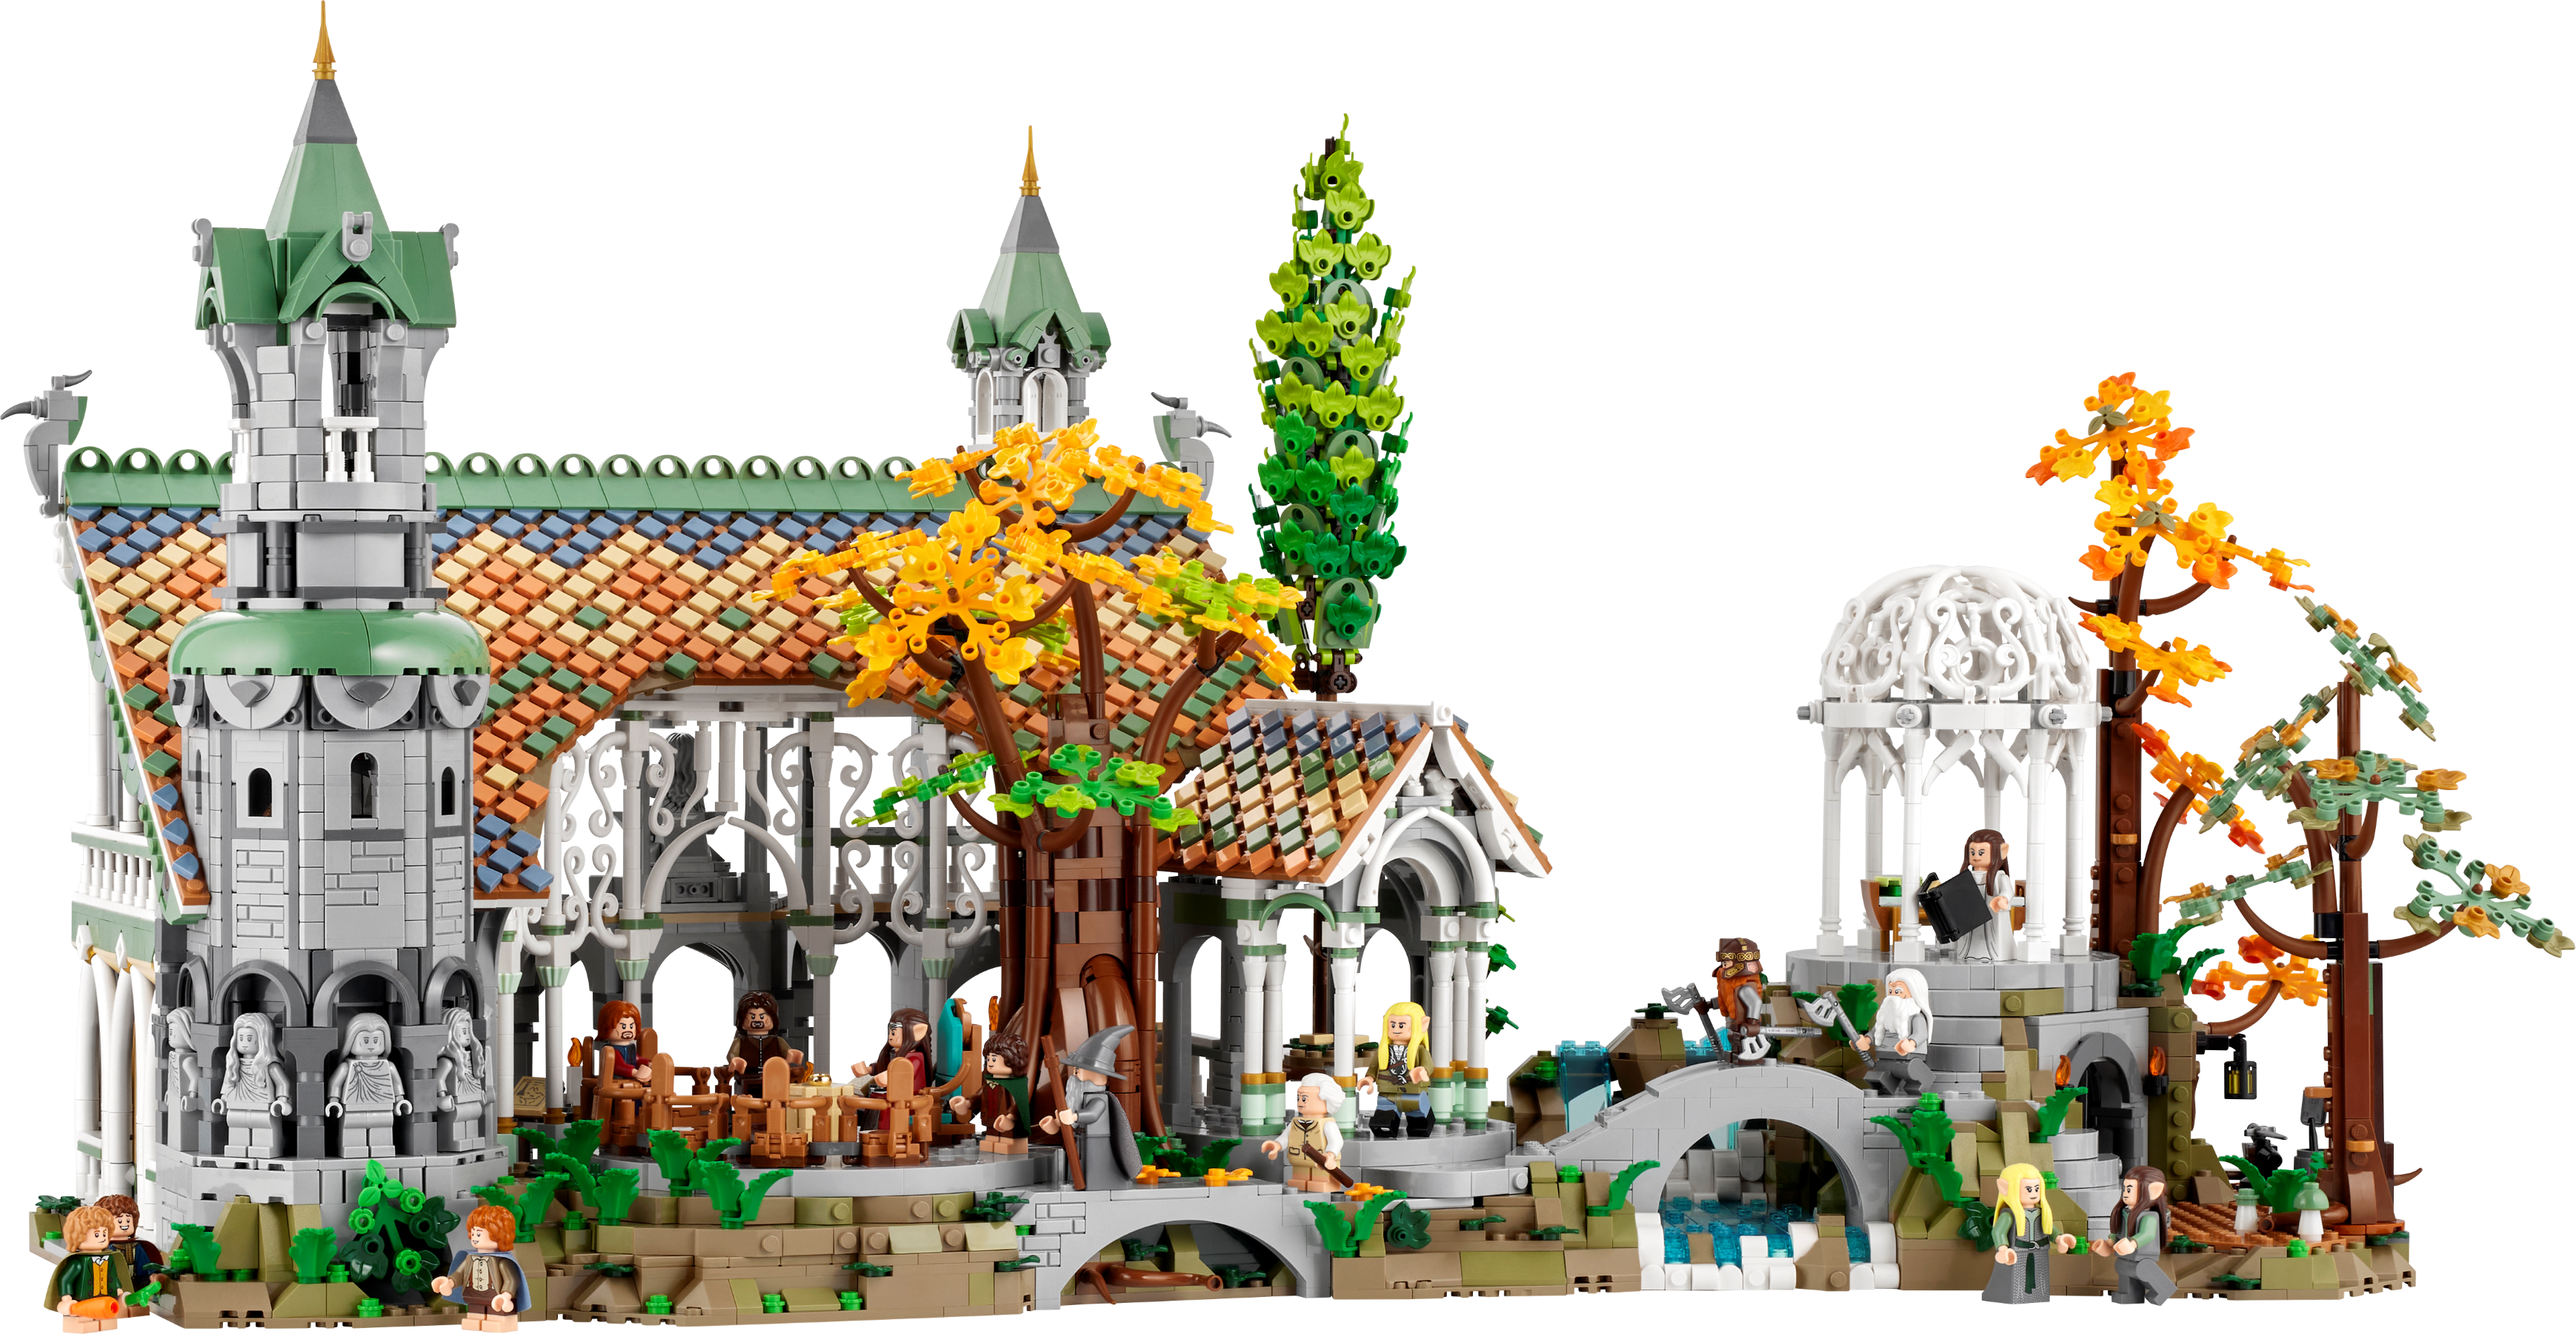 kop Pickering Met pensioen gaan THE LORD OF THE RINGS: RIVENDELL™ 10316 | Lord of the Rings™ | Buy online  at the Official LEGO® Shop US